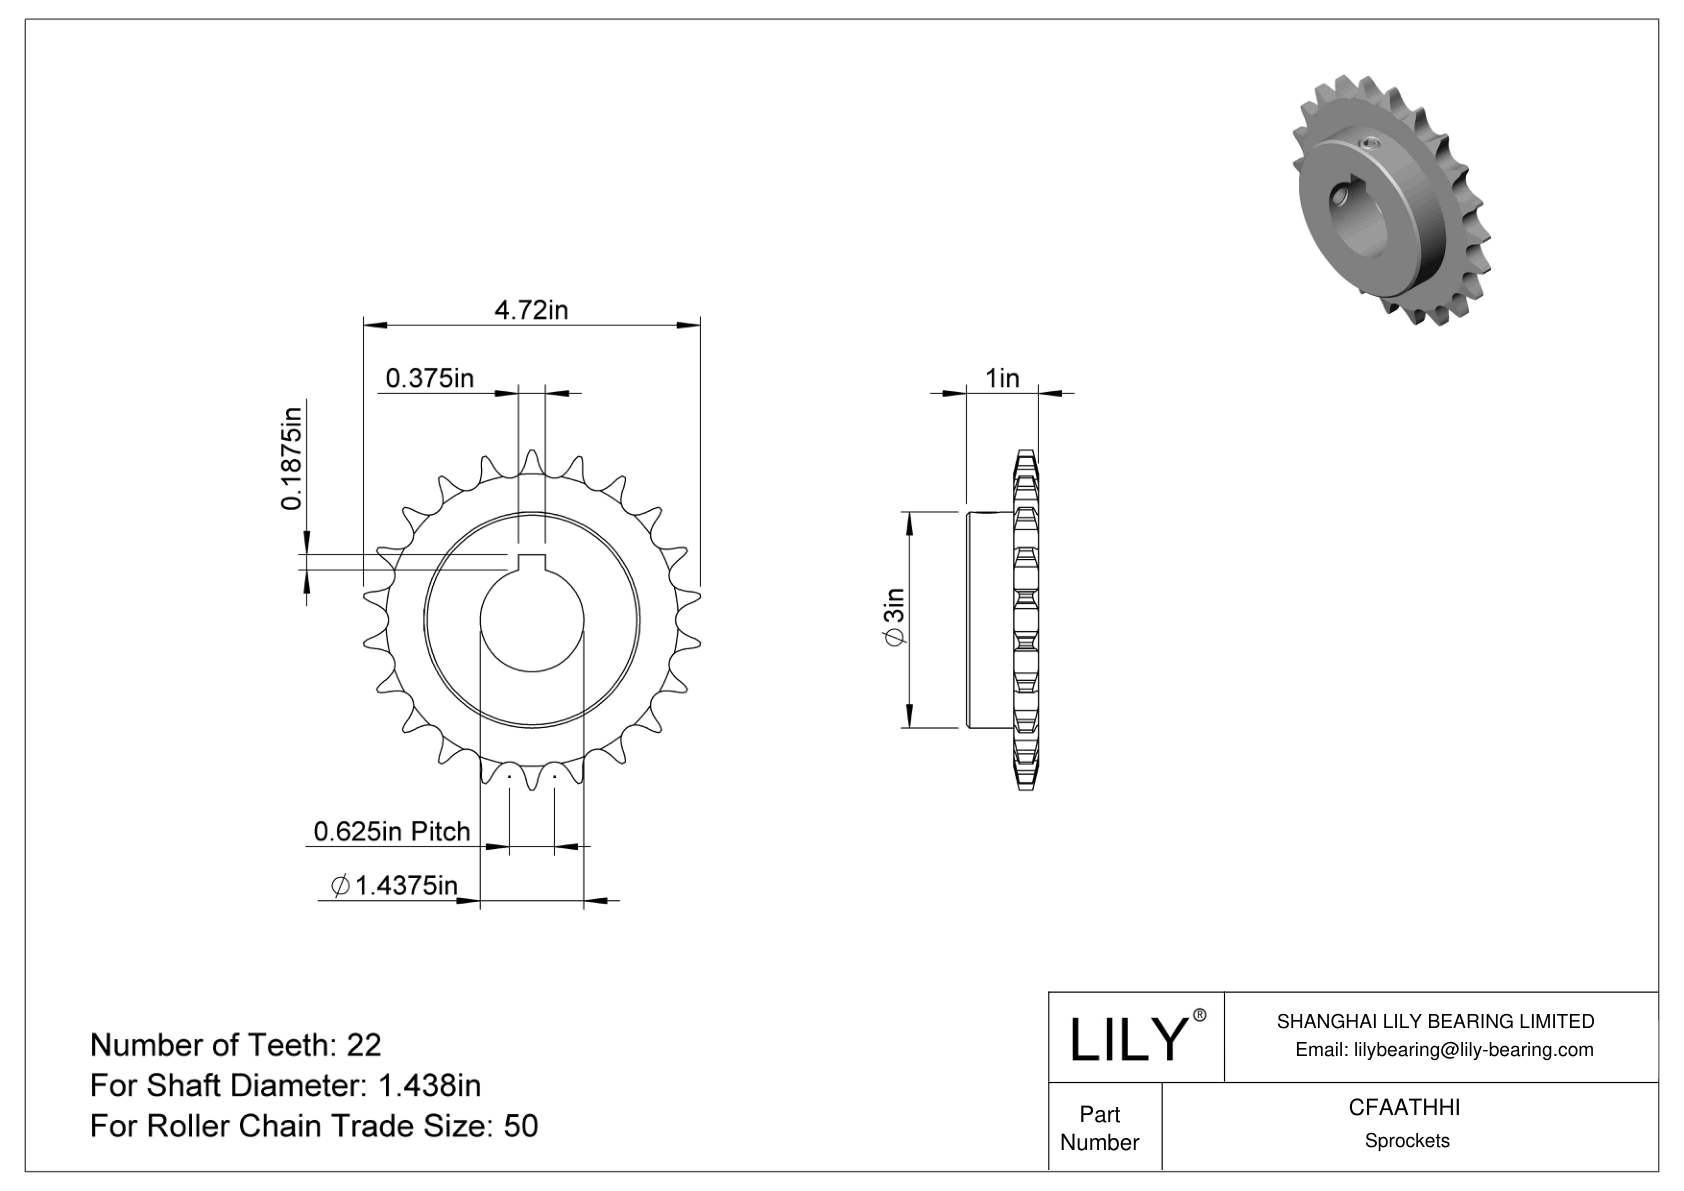 CFAATHHI Wear-Resistant Sprockets for ANSI Roller Chain cad drawing